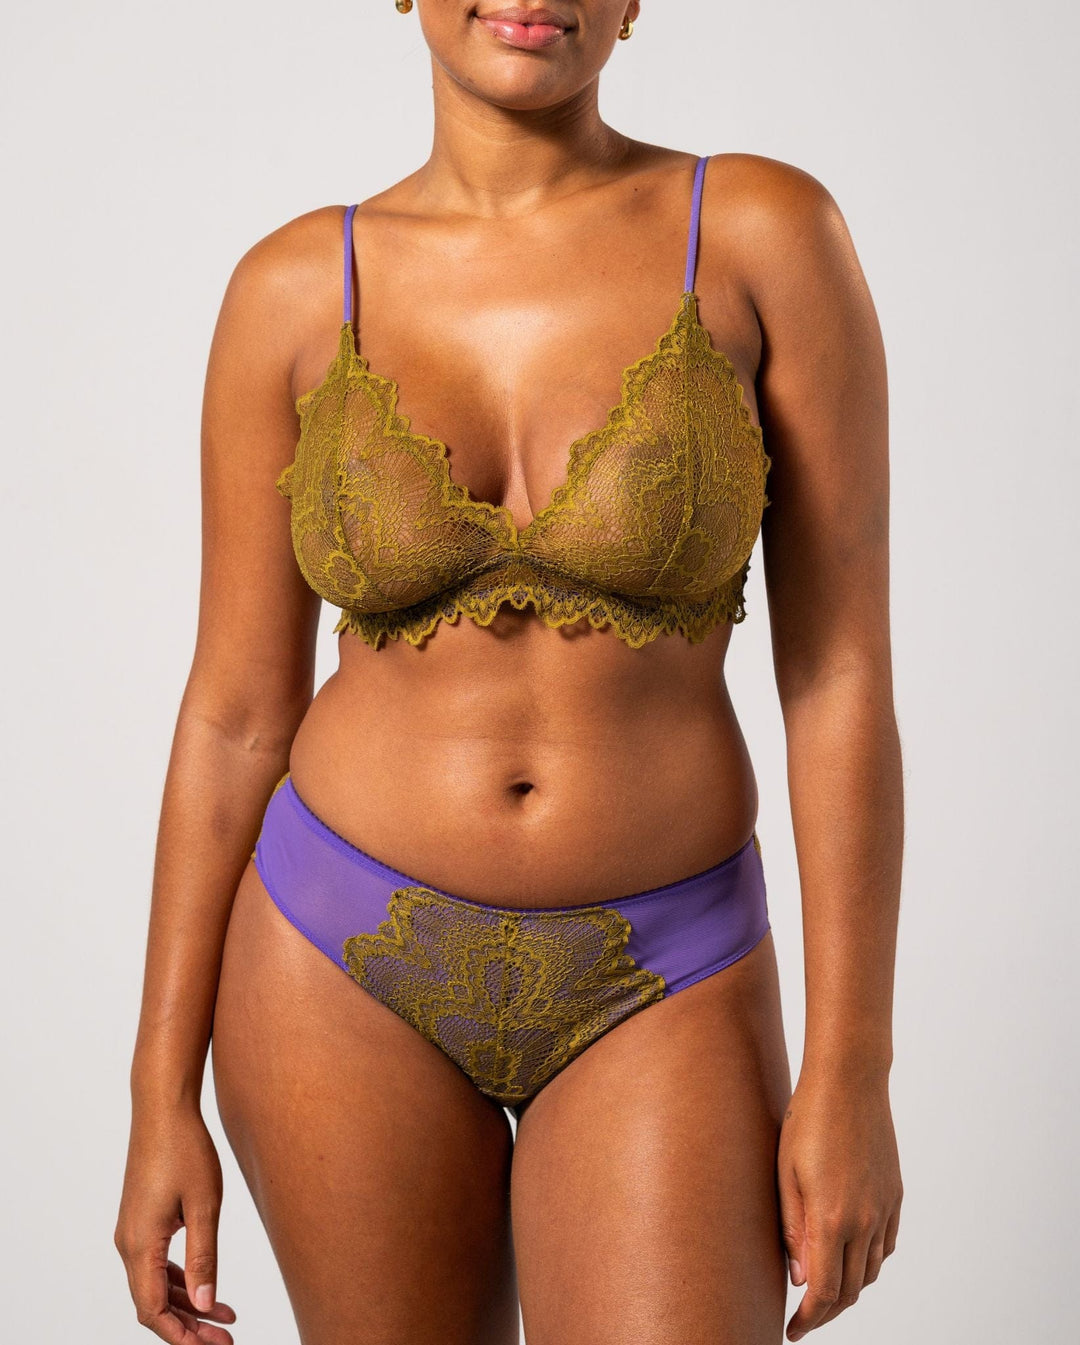 Lace Cheeky Olive/Lavender